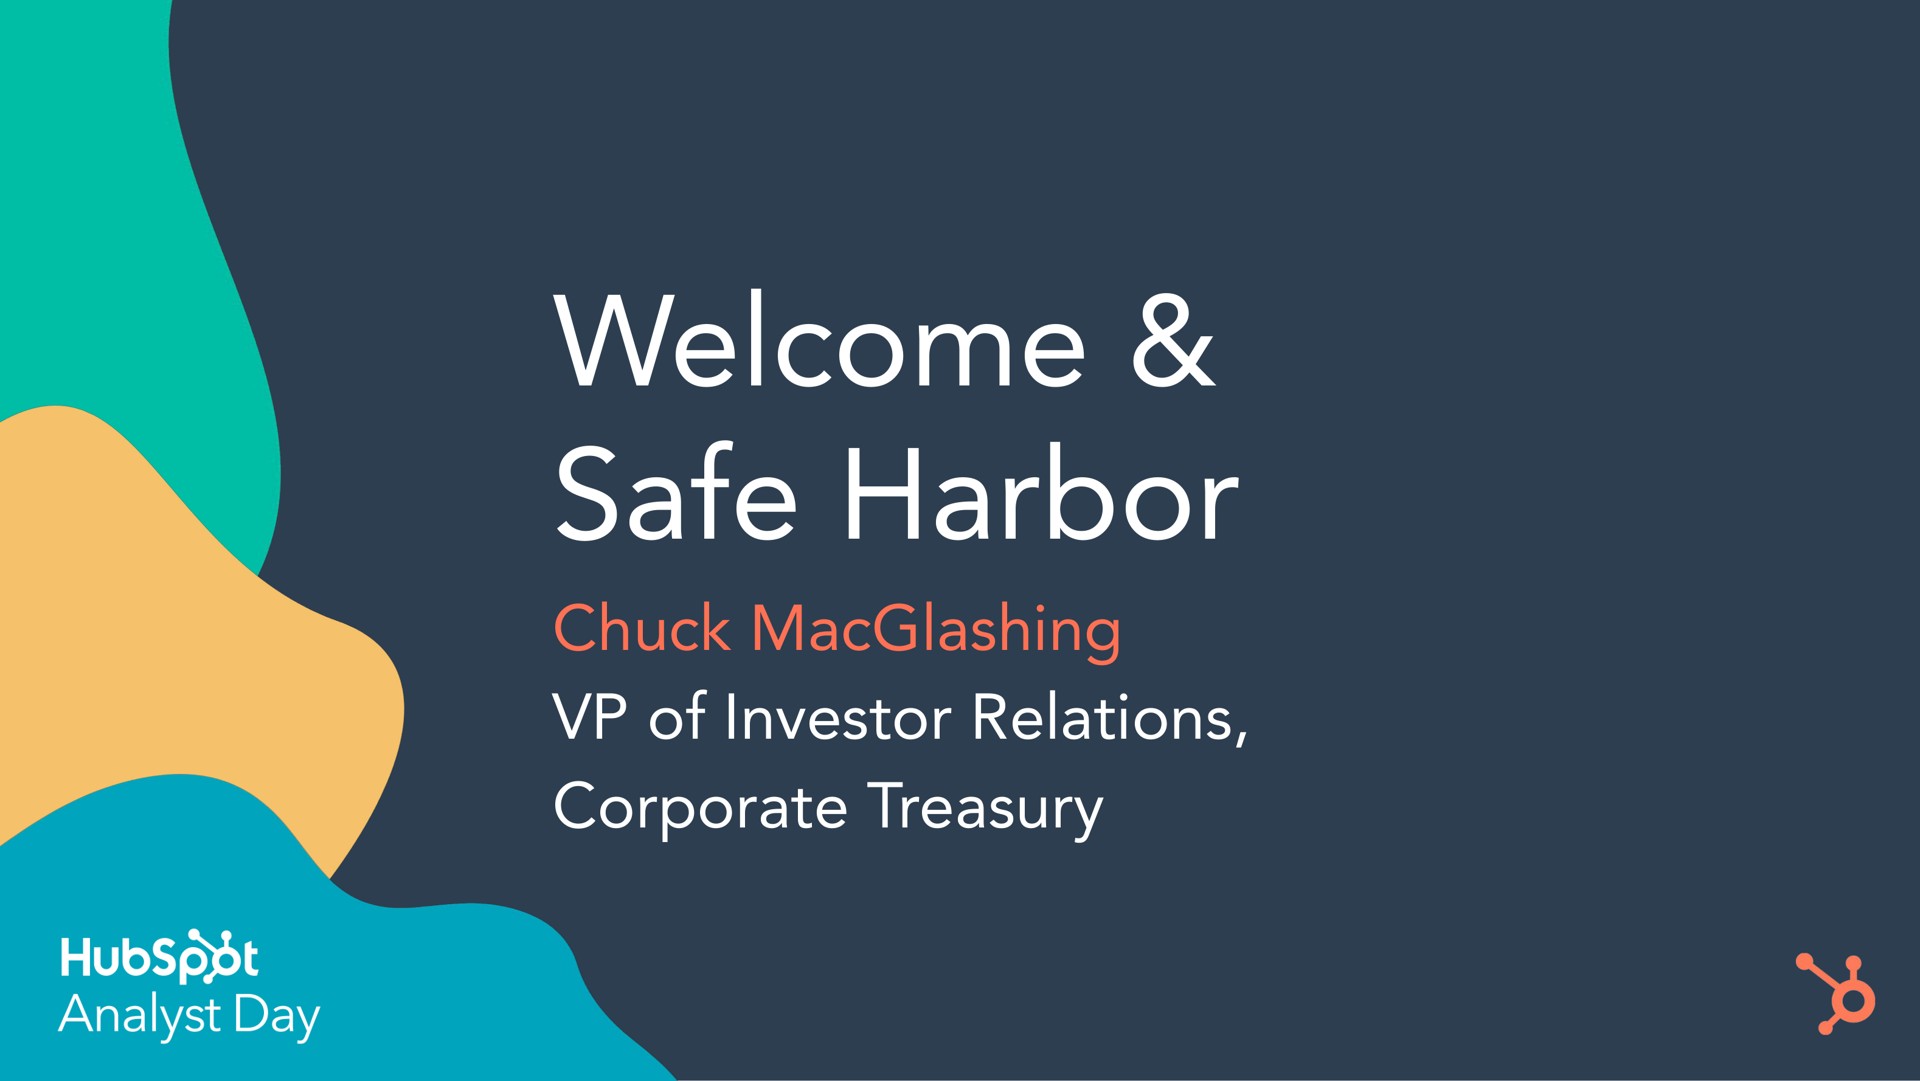 welcome safe harbor sate chuck of investor relations corporate treasury | Hubspot